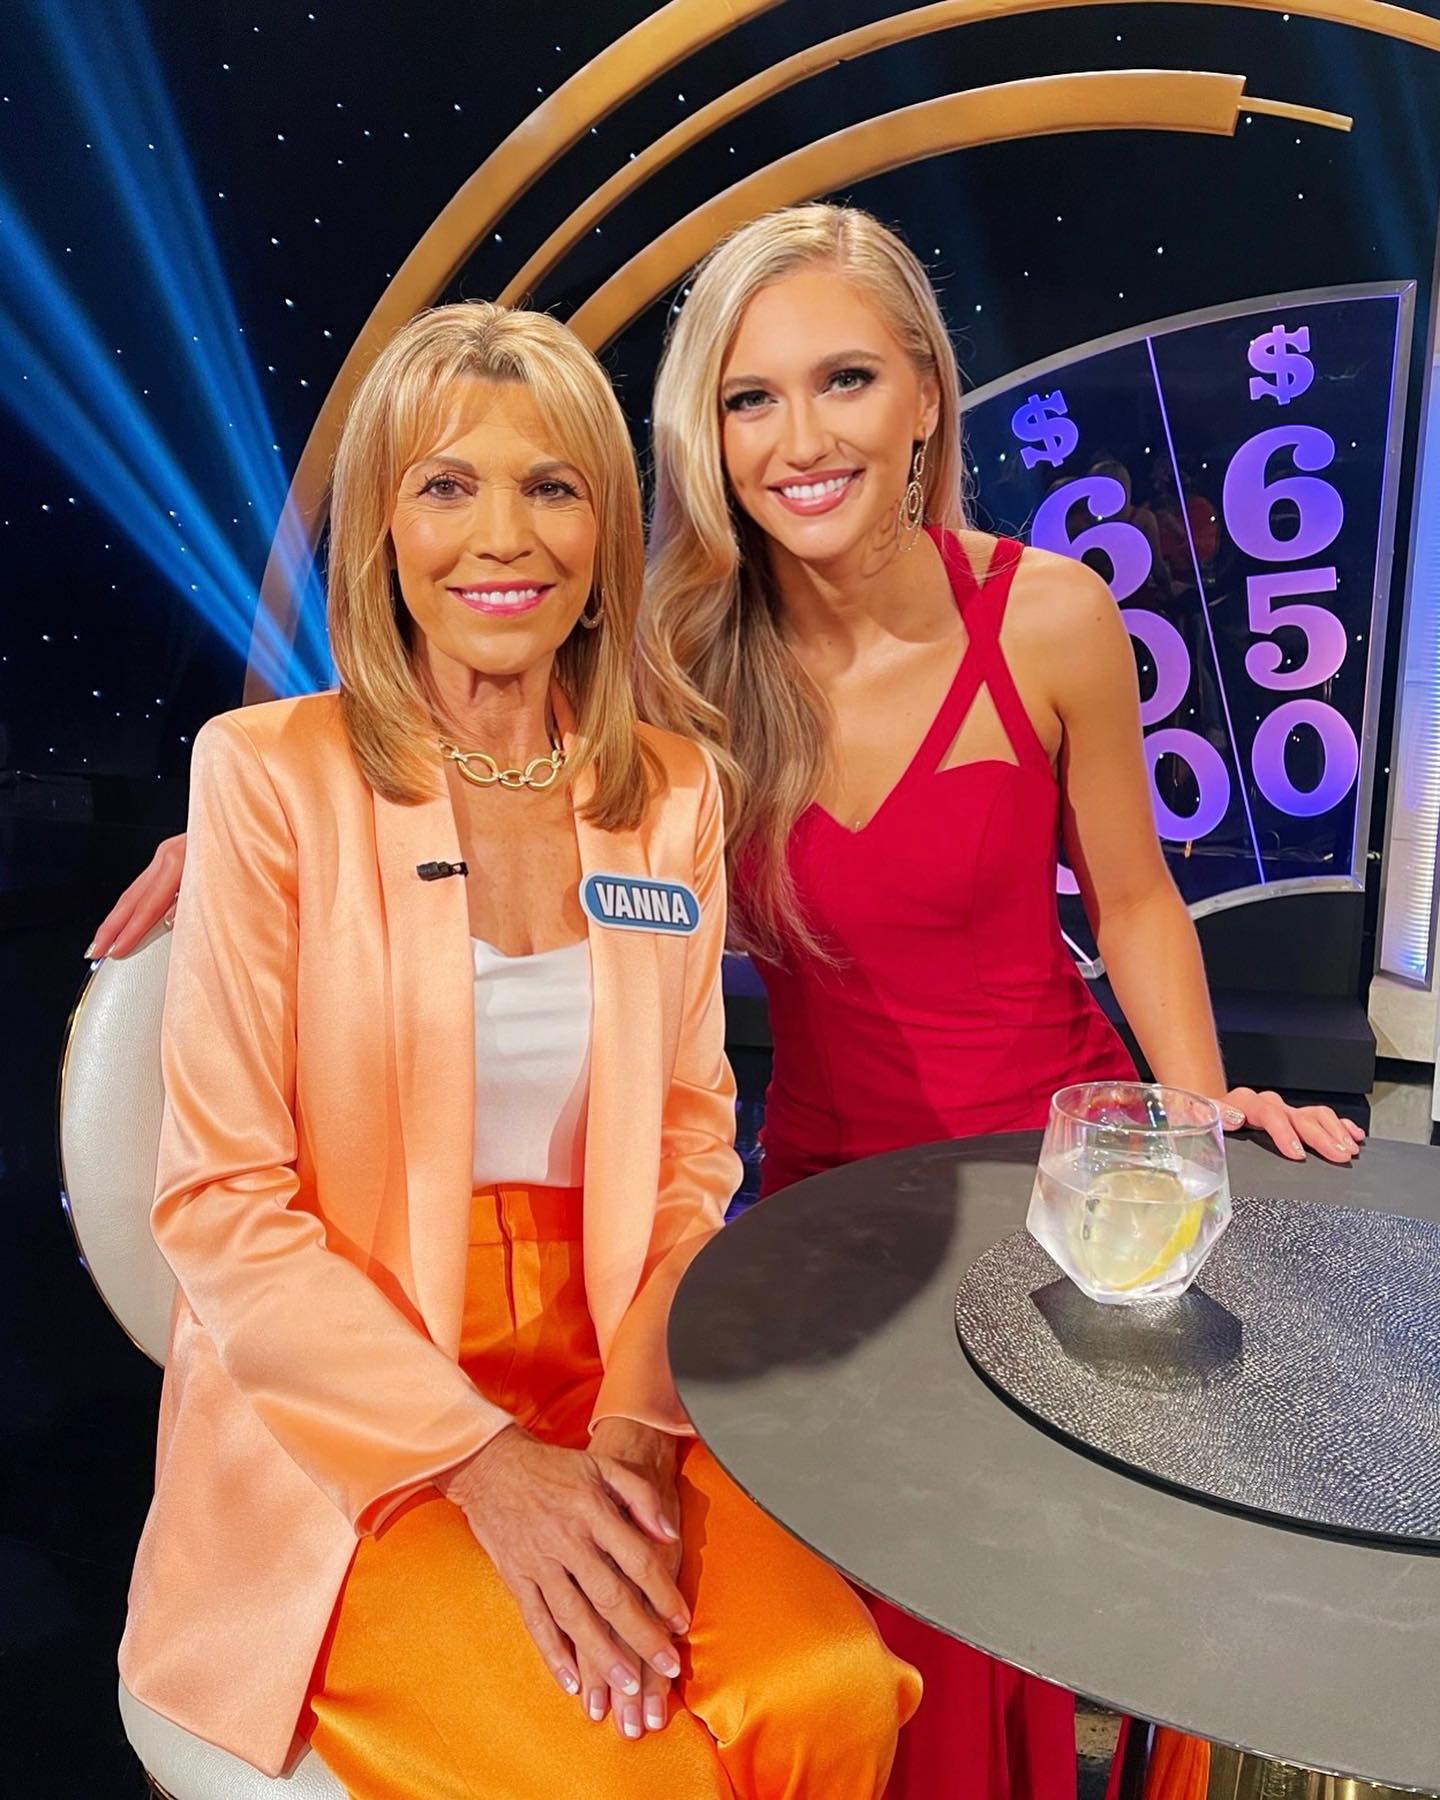 Many fans believe Maggie will take over as the Wheel of Fortune co-host once Vanna White's contract has ended